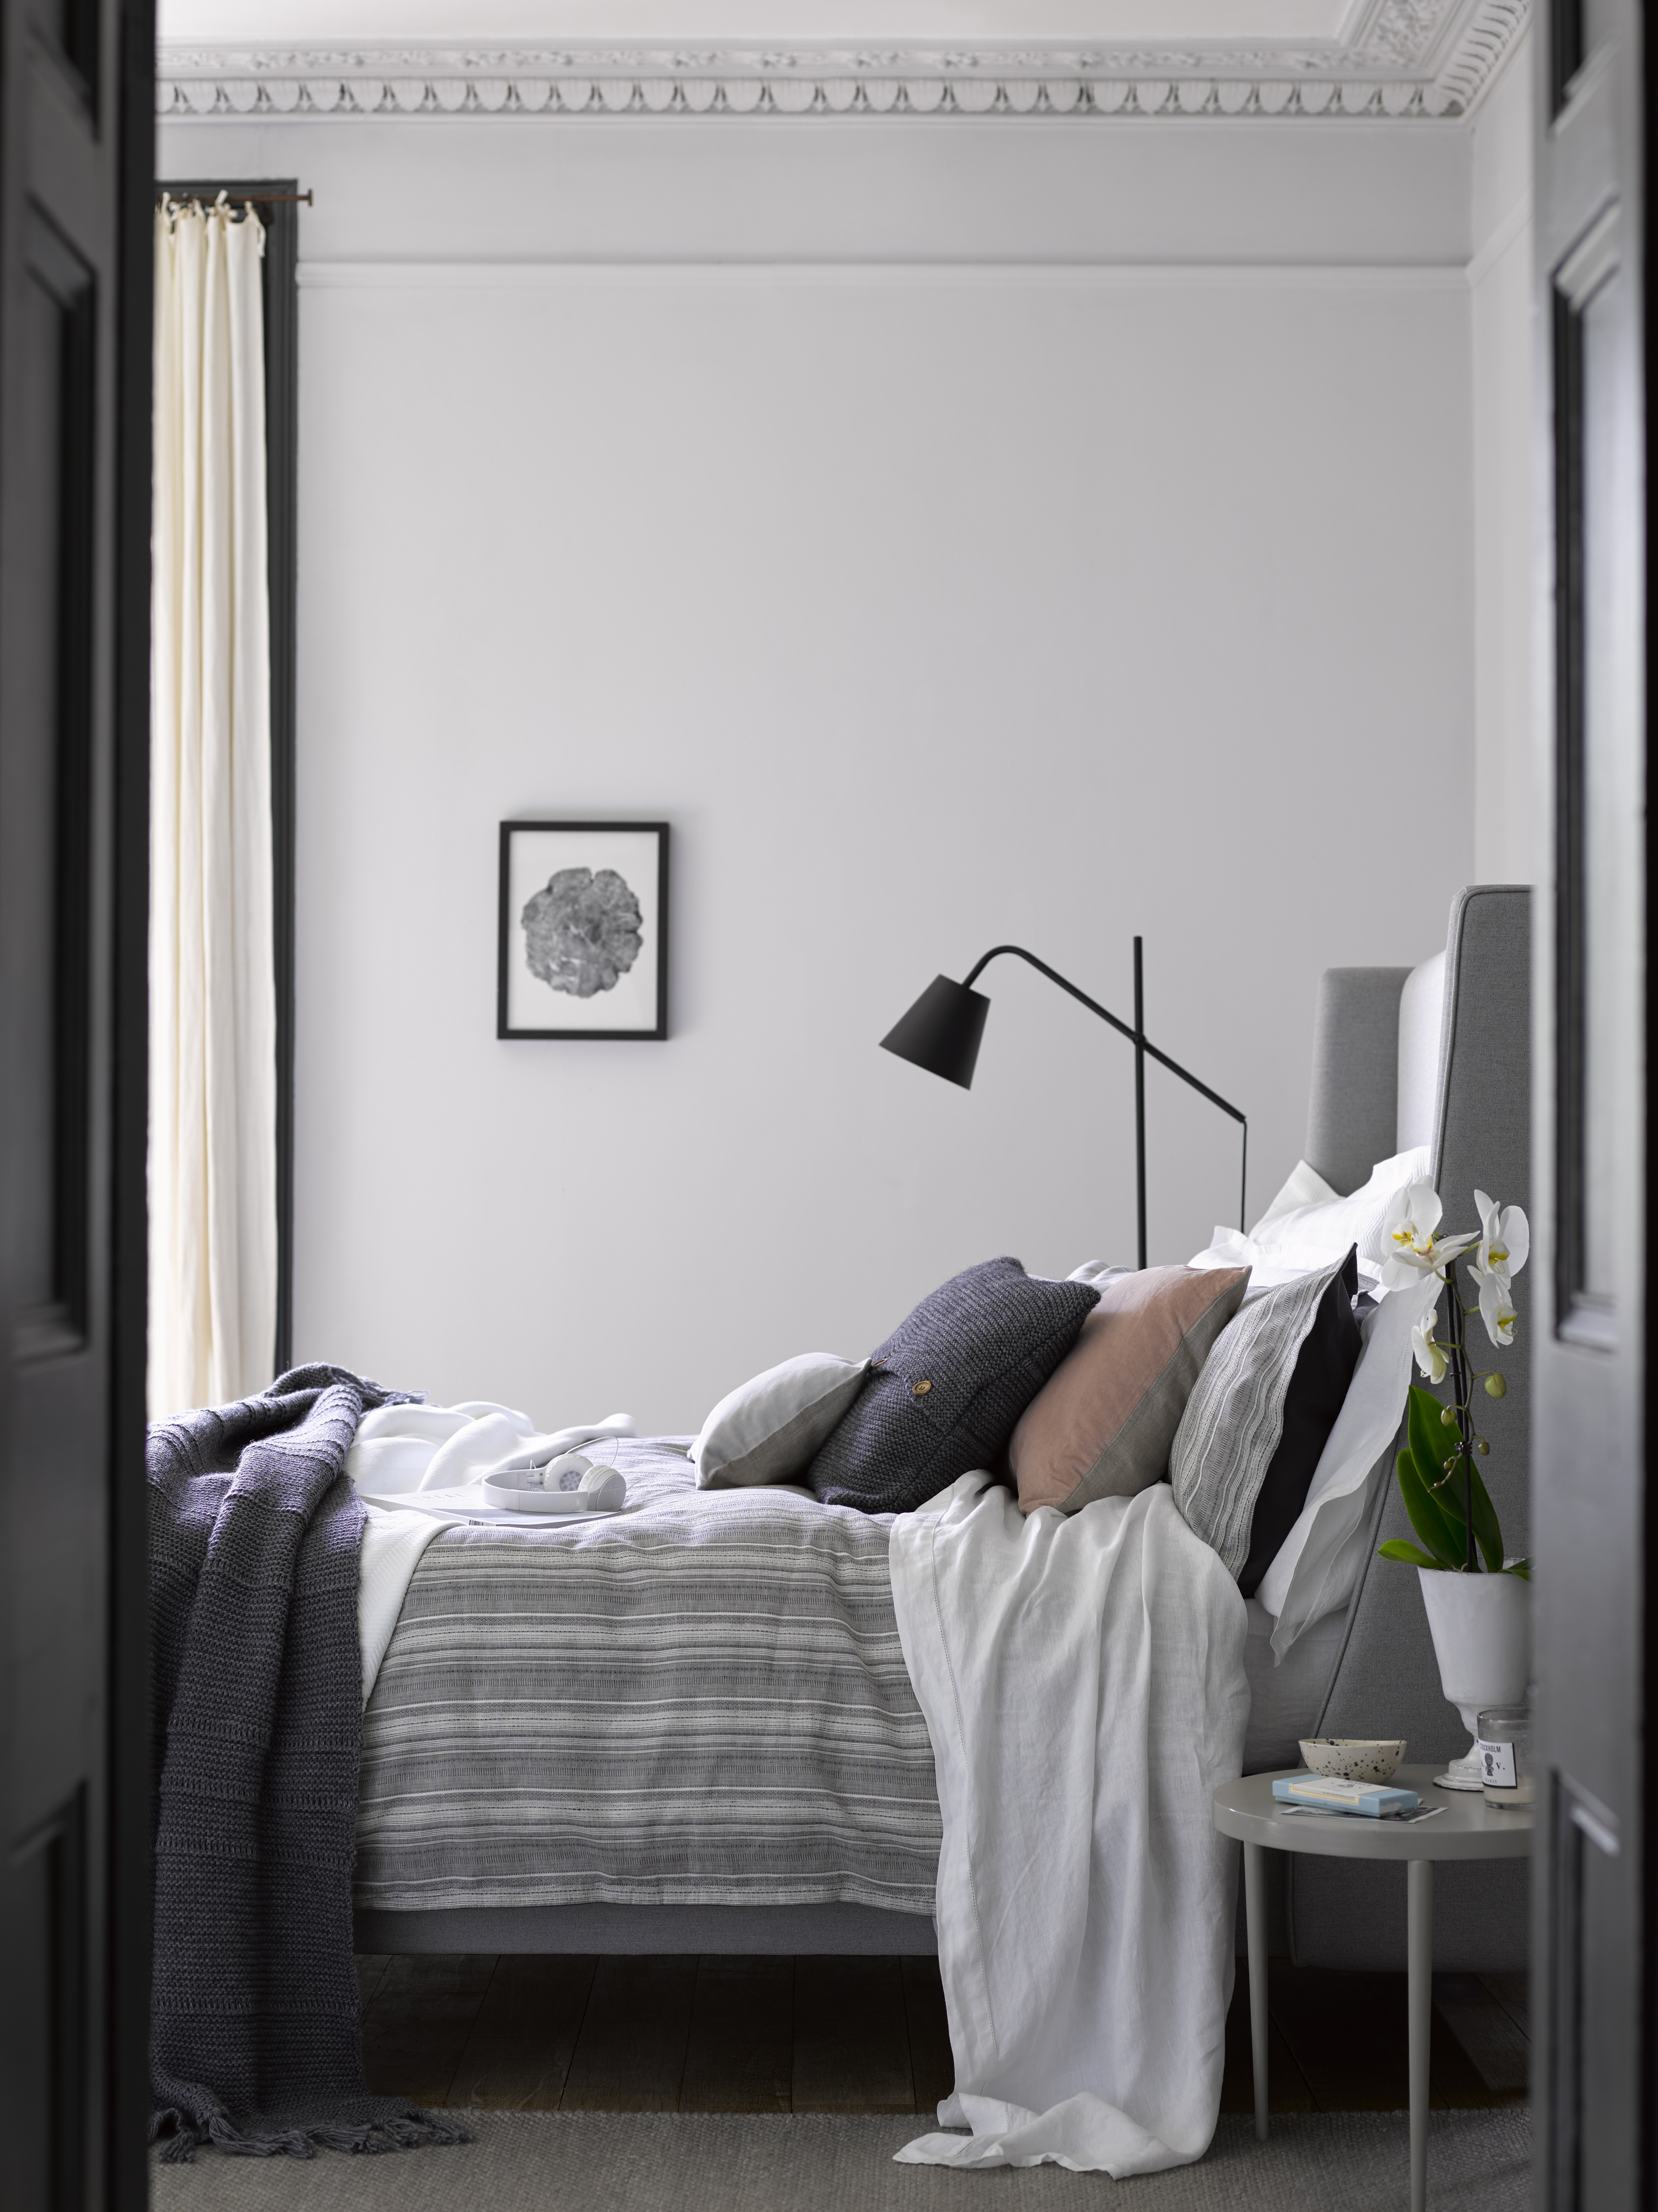 A muted gray bedroom scheme with white, blush and navy soft furnishings and black metal lighting illustrates how to choose the best bedroom colors.